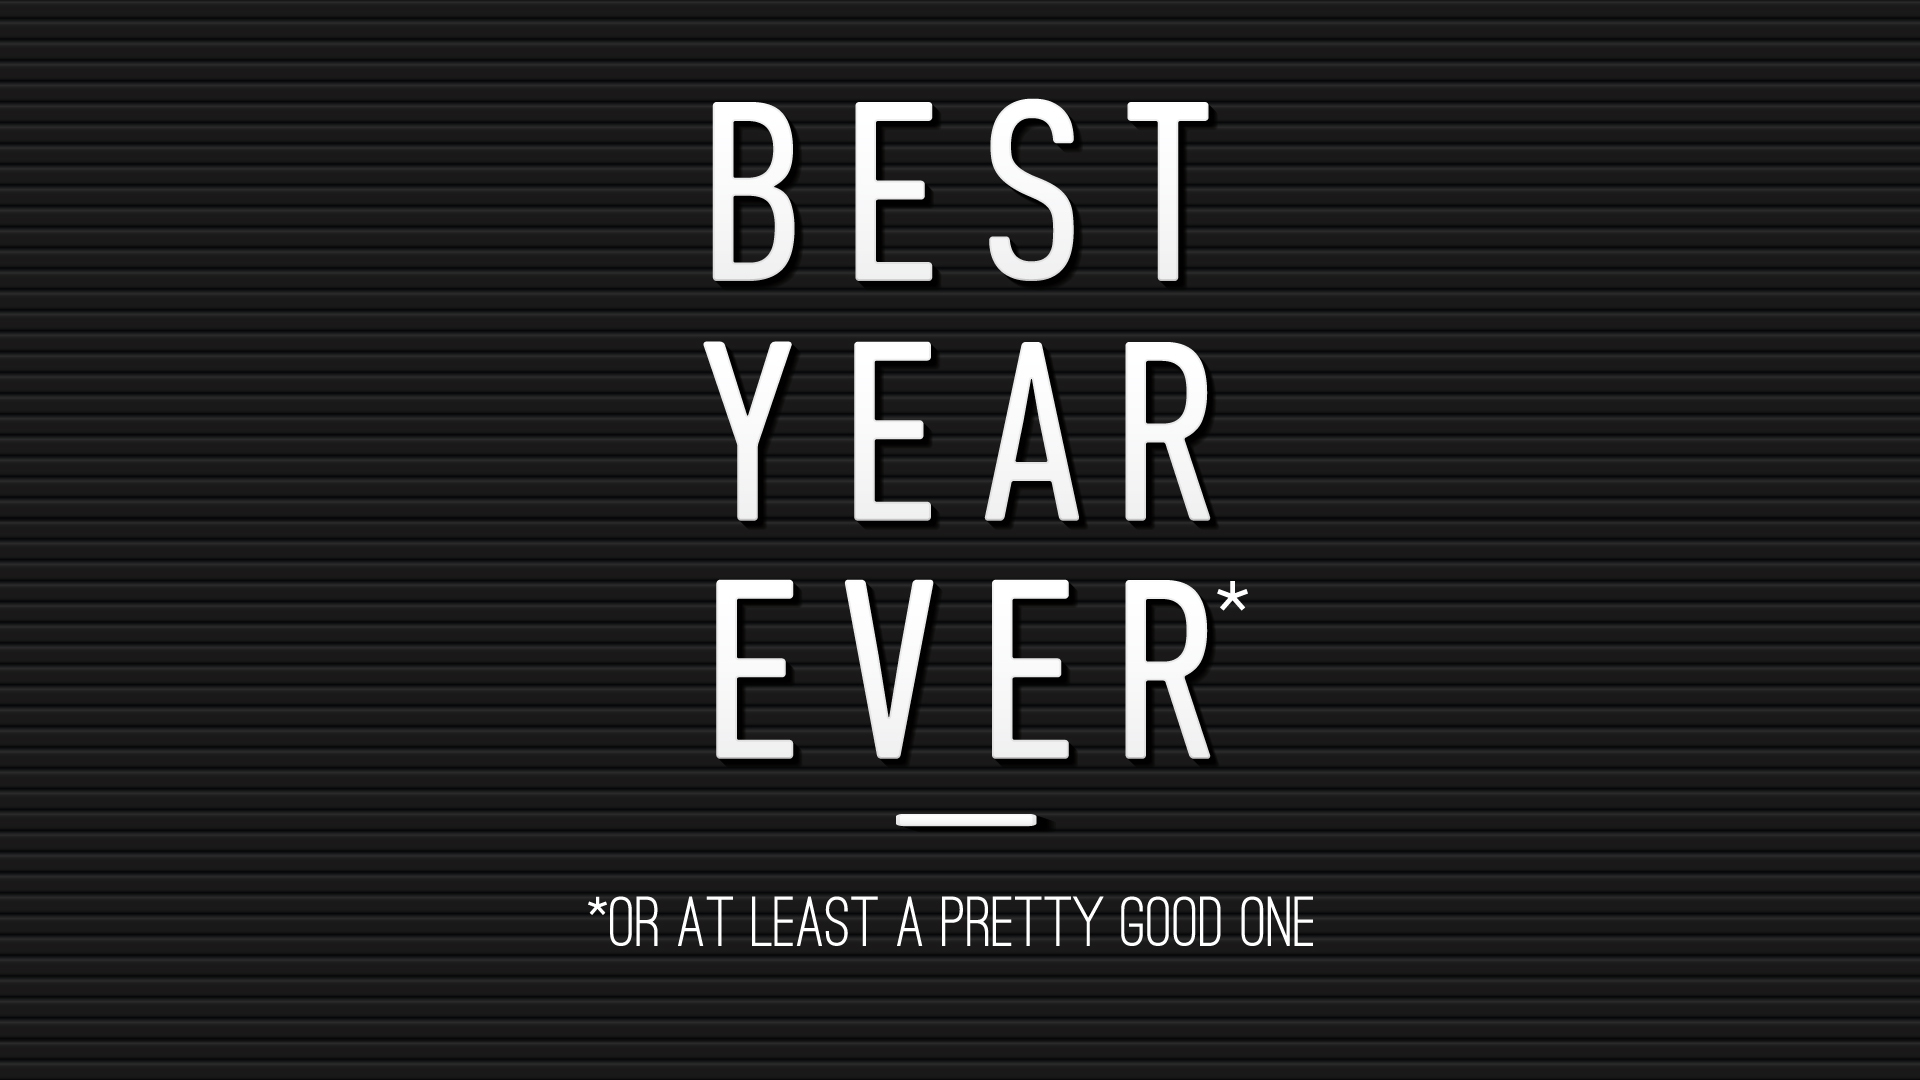 Best Year Ever*